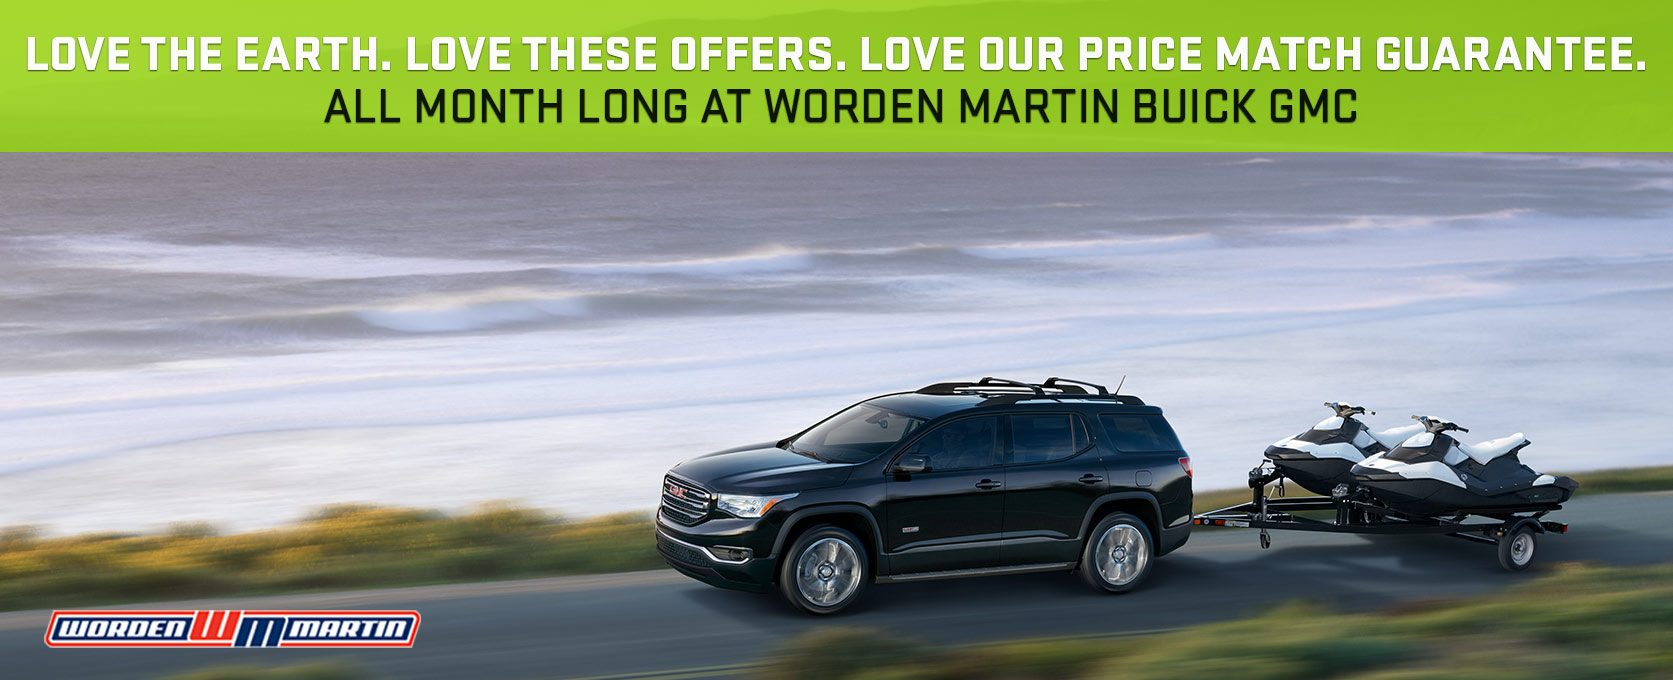 Love The Earth. Love These Offers. Love Our Price Match Guarantee.